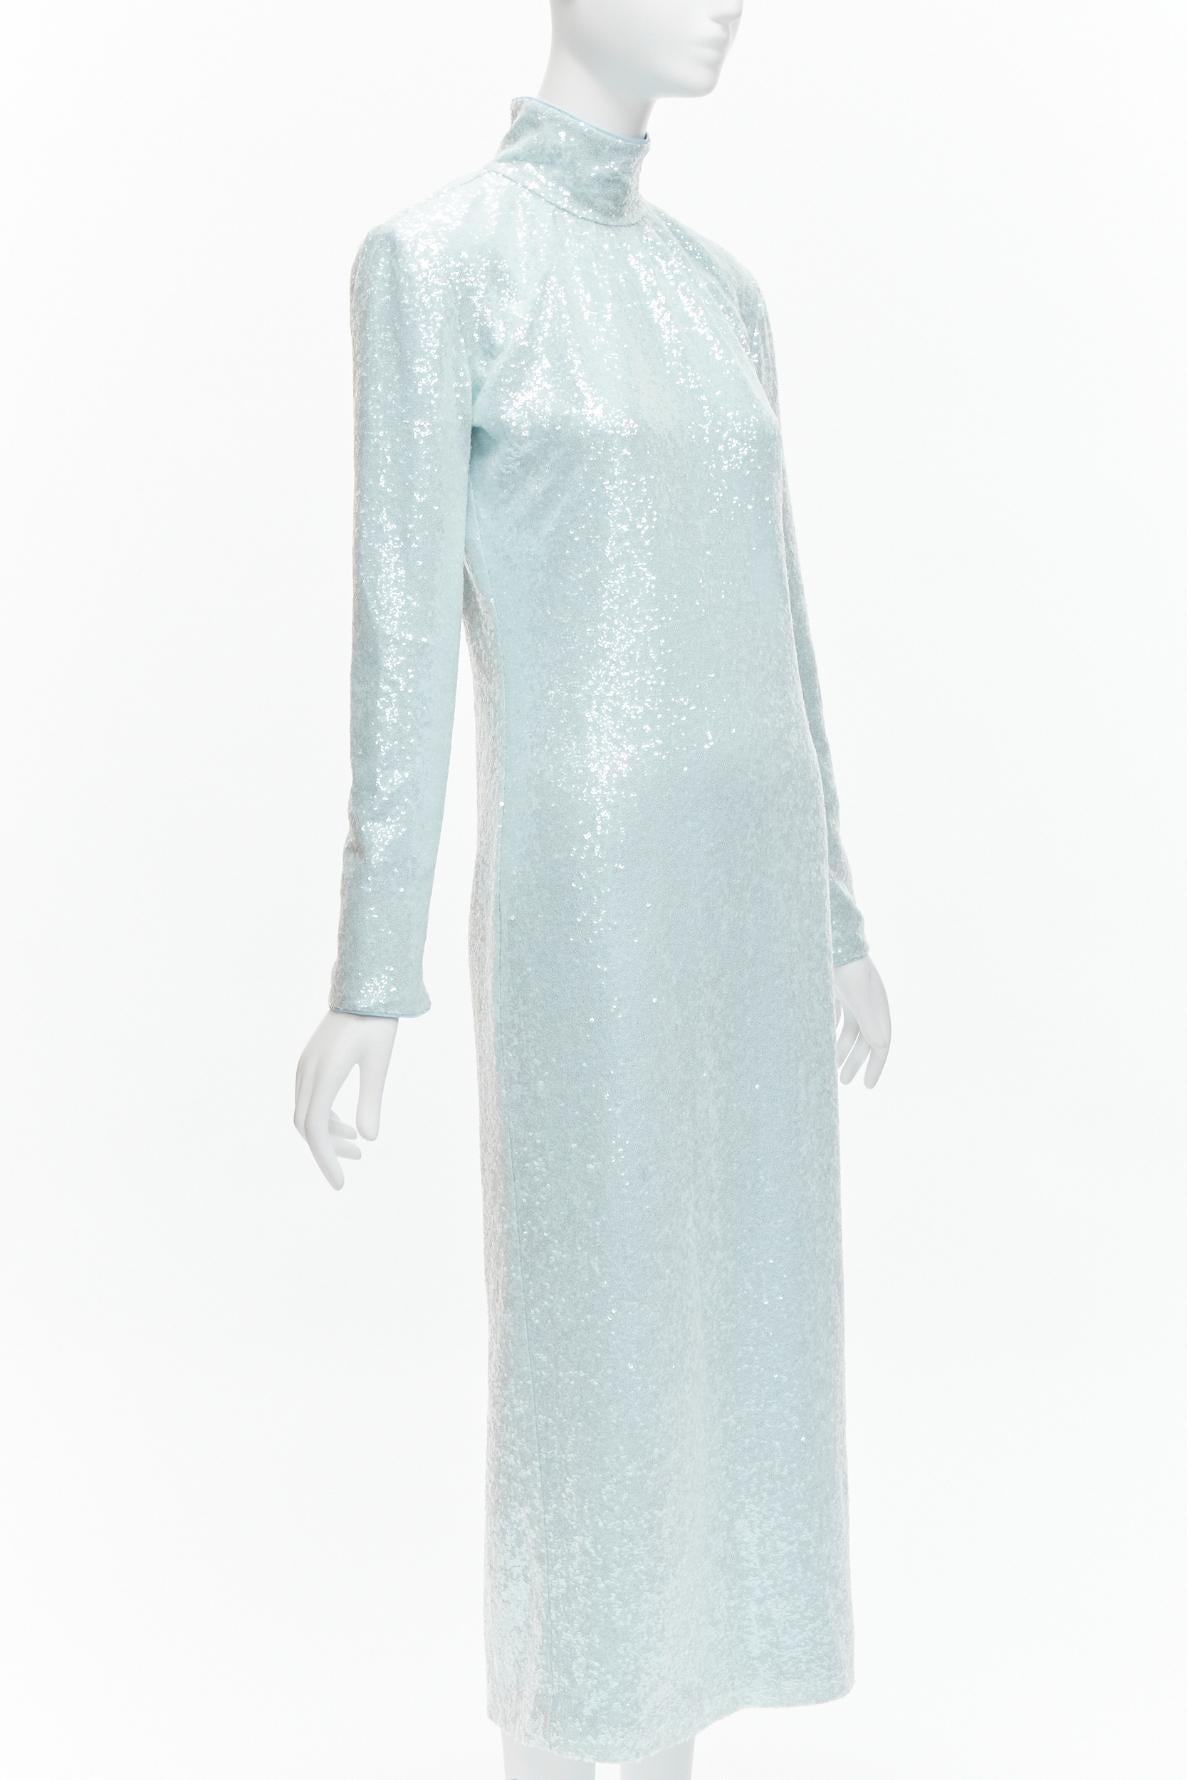 16ARLINGTON Vida light blue sequins high neck long sleeves cocktail dress UK6 XS In New Condition For Sale In Hong Kong, NT